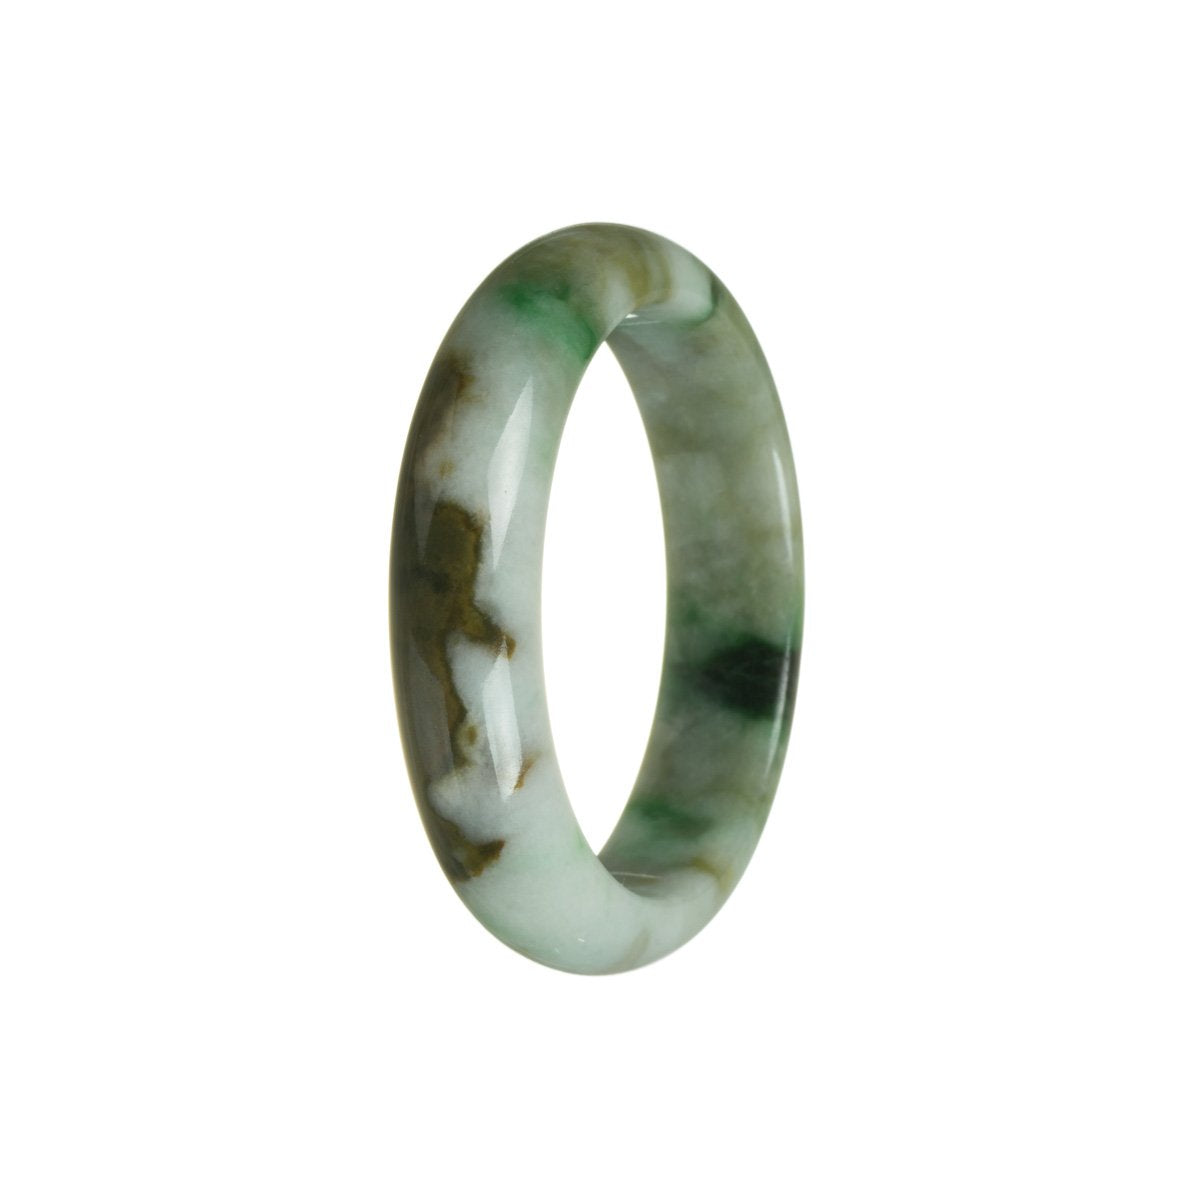 A close-up image of a beautiful jade bracelet with a half-moon shape. The bracelet features real Type A Green jade, with a mix of brown and white colors. The size of the bracelet is 55mm. This stunning piece of jewelry is from the brand MAYS.